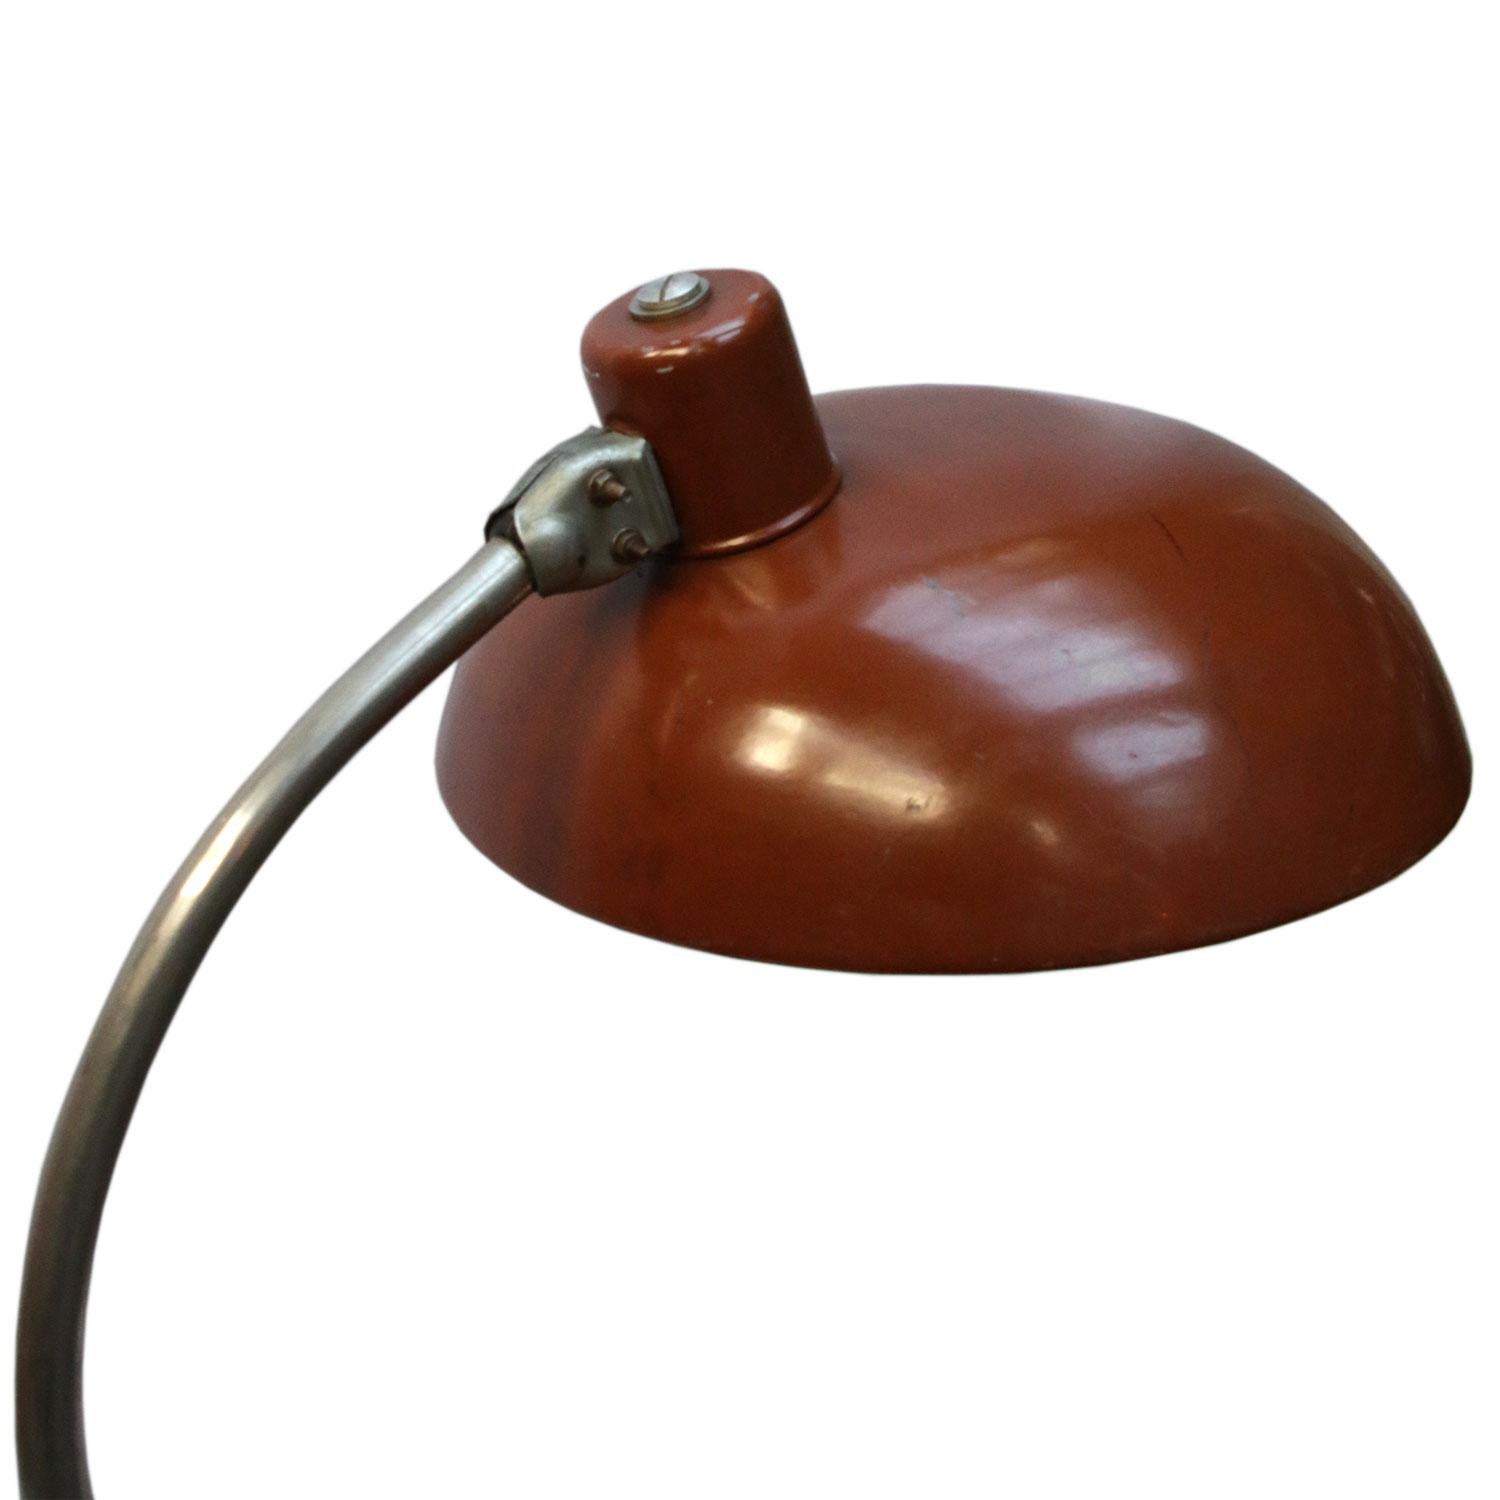 Desk light brown. Metal desk light. 2 meter black wire. 

Weight: 2.2 kg / 4.9 lb

All lamps have been made suitable by international standards for incandescent light bulbs, energy-efficient and LED bulbs. E26/E27 bulb holders and new wiring are